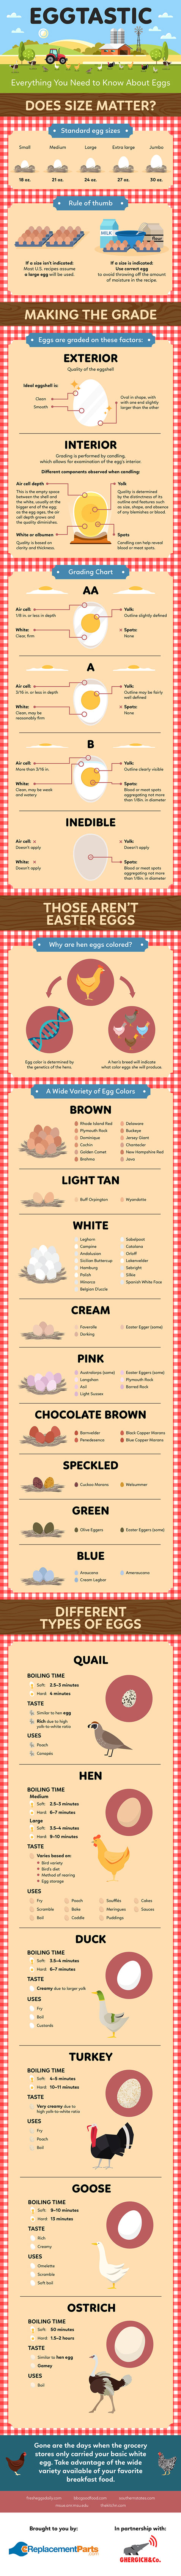 Complete-Guide-to-Eggs